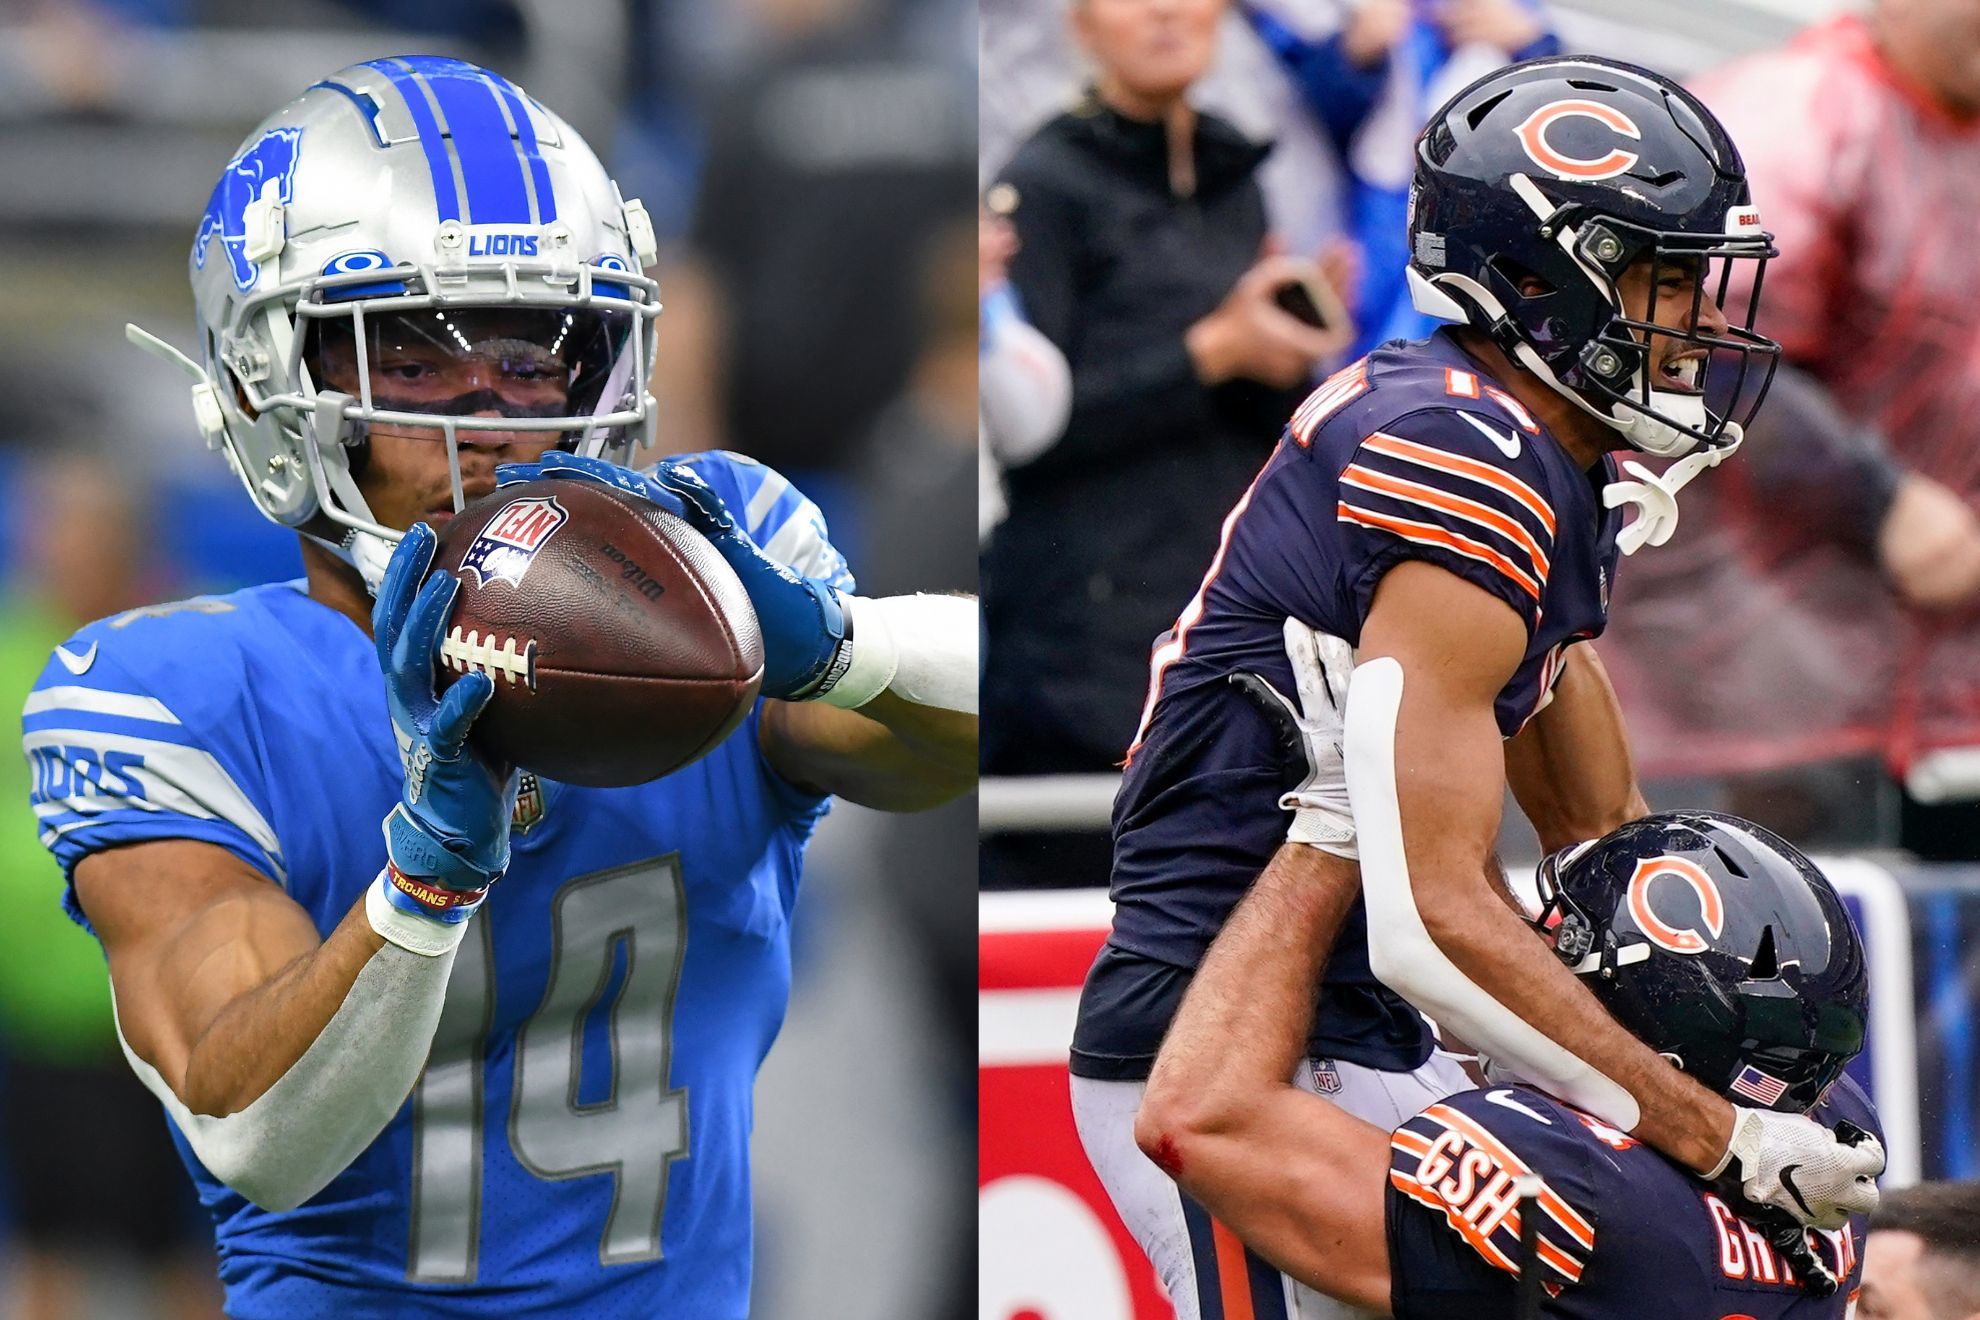 Brothers Amon-Ra St. Brown of the Detroit Lions and Equanimeous St. Brown of the Chicago Bears / AP